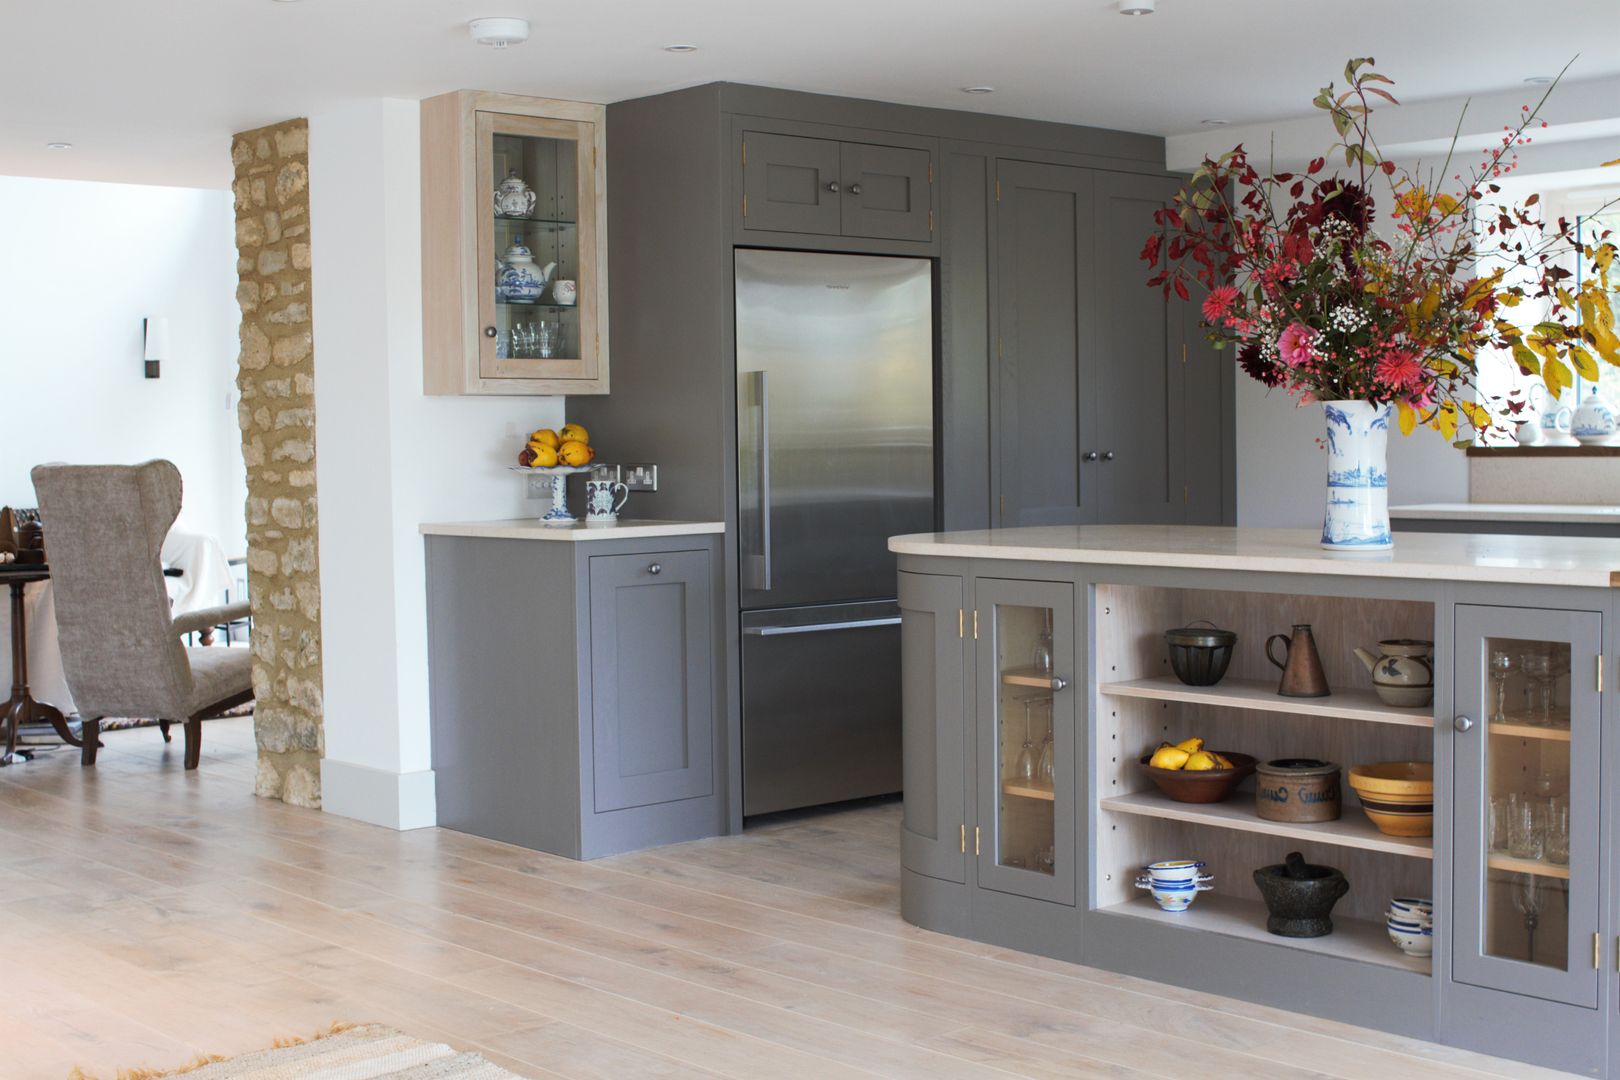 A Beautiful Open Plan Barn Conversion homify Kitchen Solid Wood Multicolored